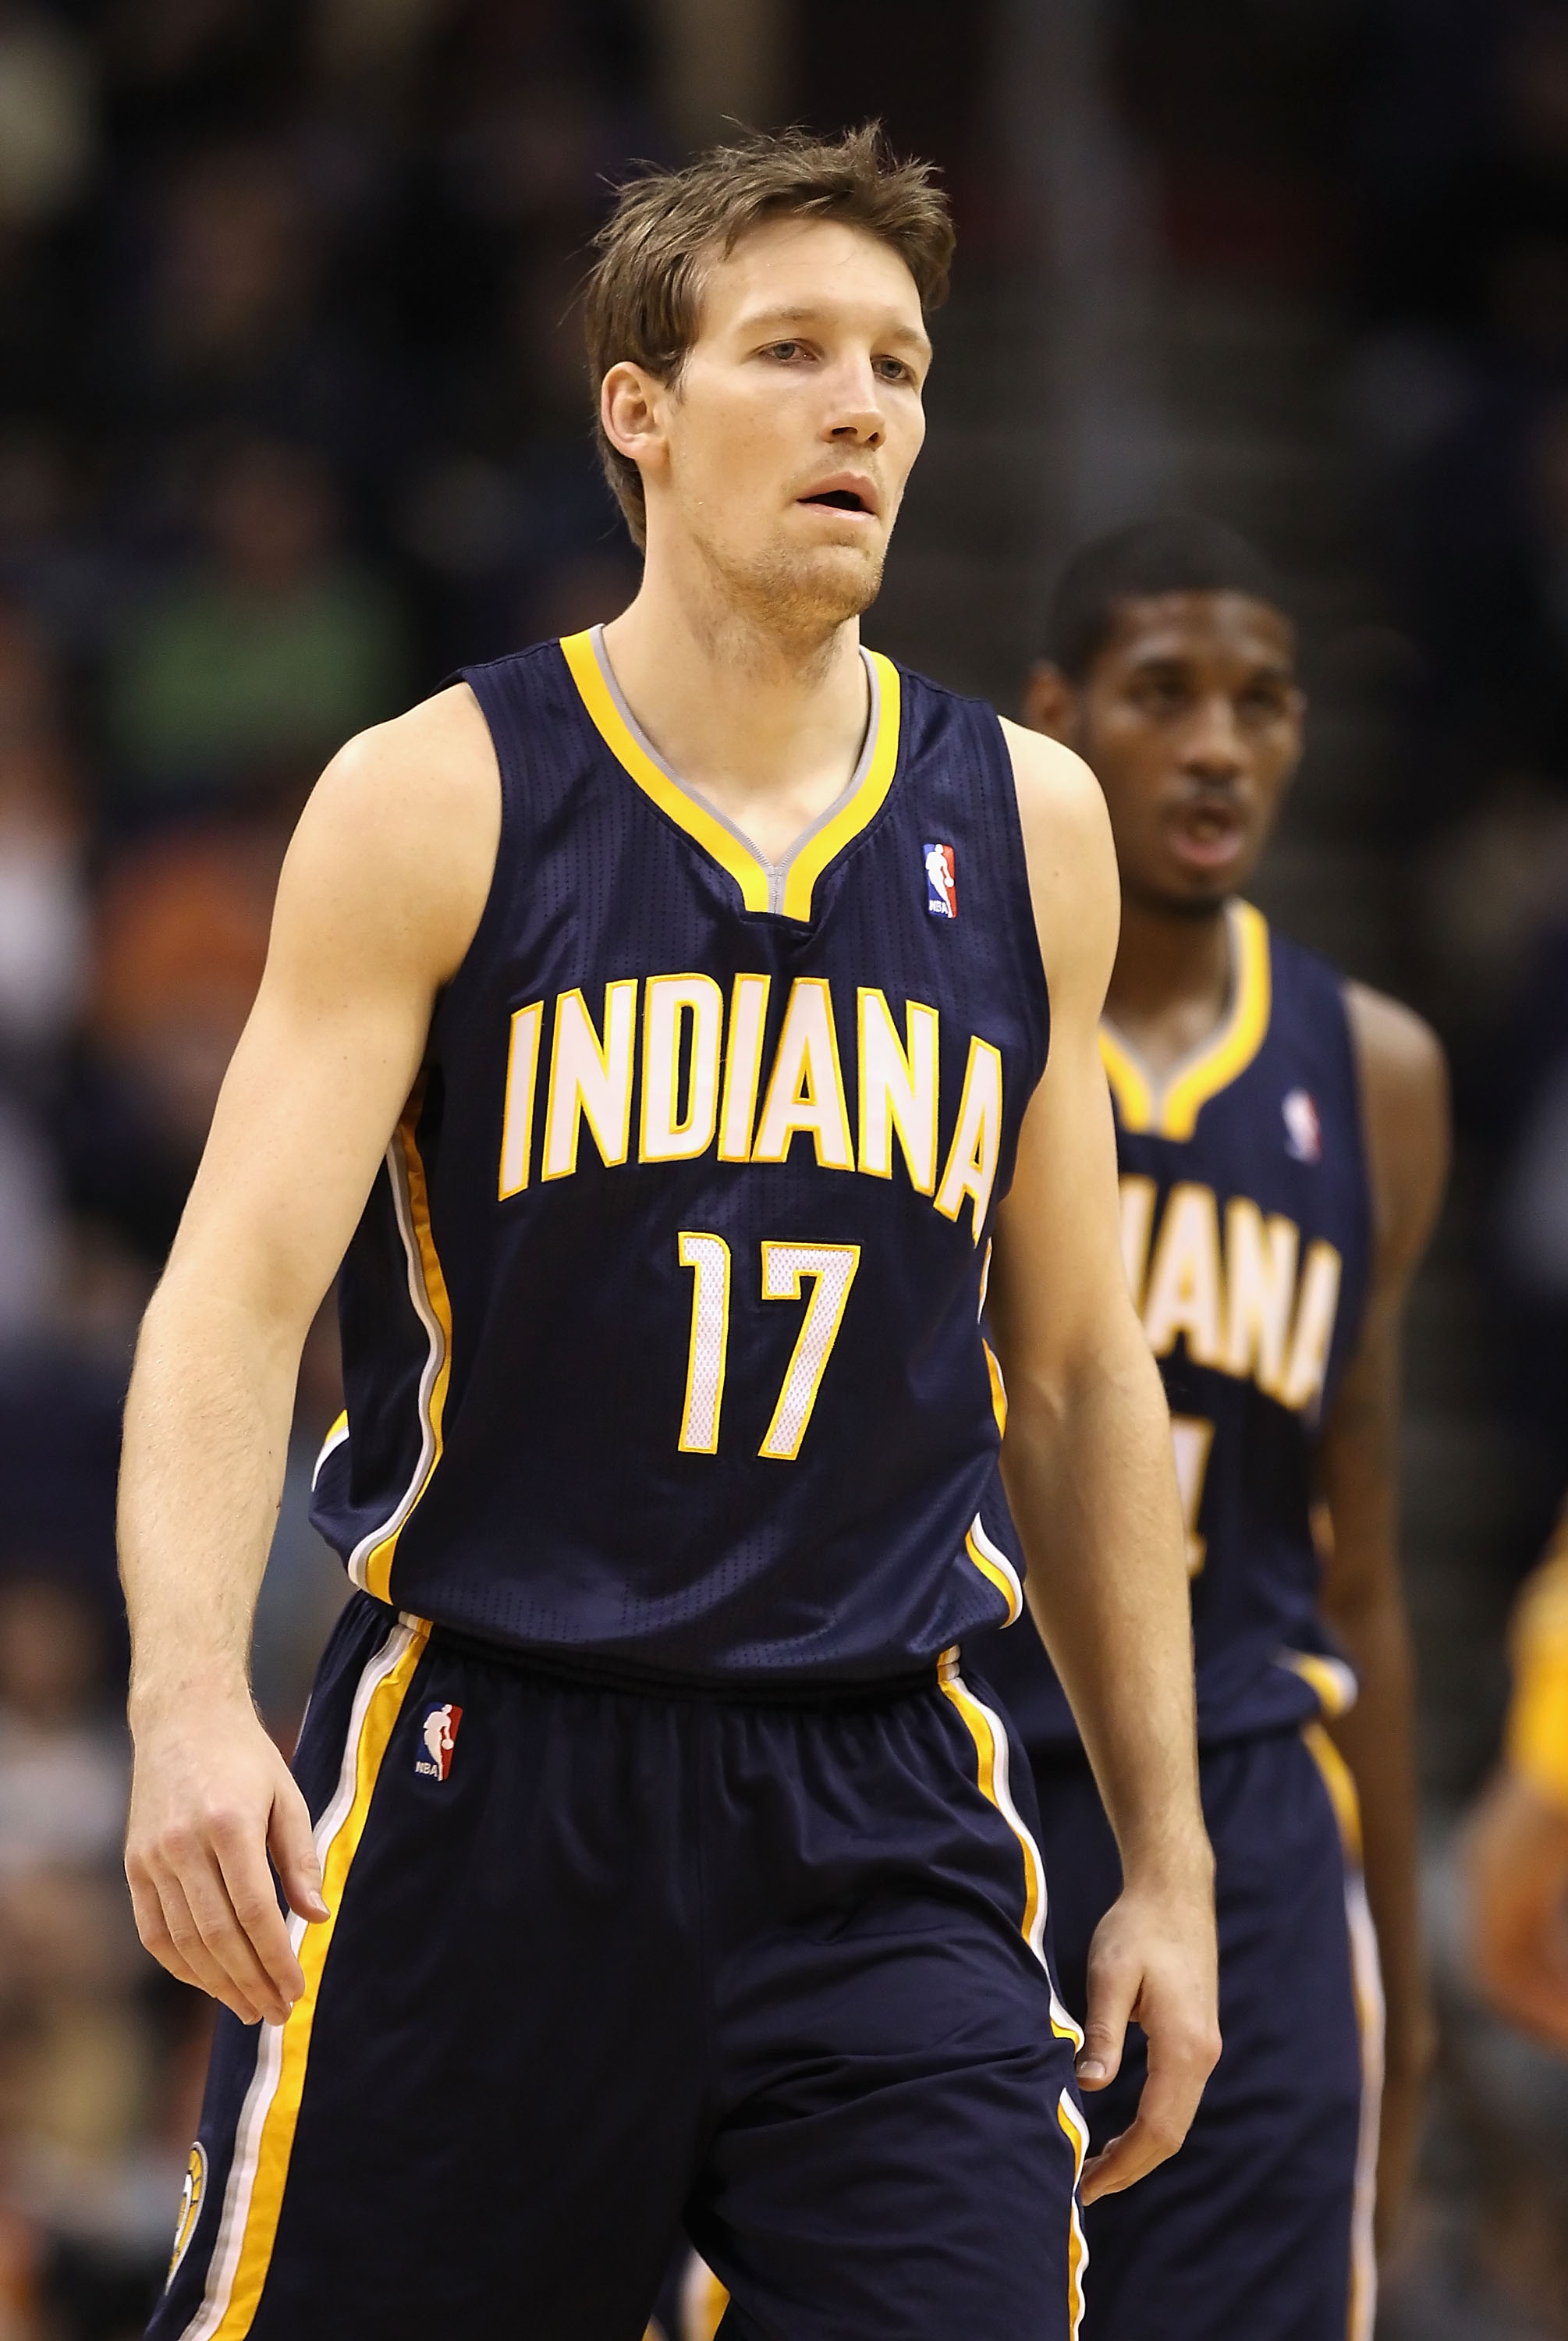 PHOENIX - DECEMBER 03:  Mike Dunleavy #17 of the Indiana Pacers during the NBA game against the Phoenix Suns at US Airways Center on December 3, 2010 in Phoenix, Arizona.  The Suns defeated the Pacers 105-97.  NOTE TO USER: User expressly acknowledges and